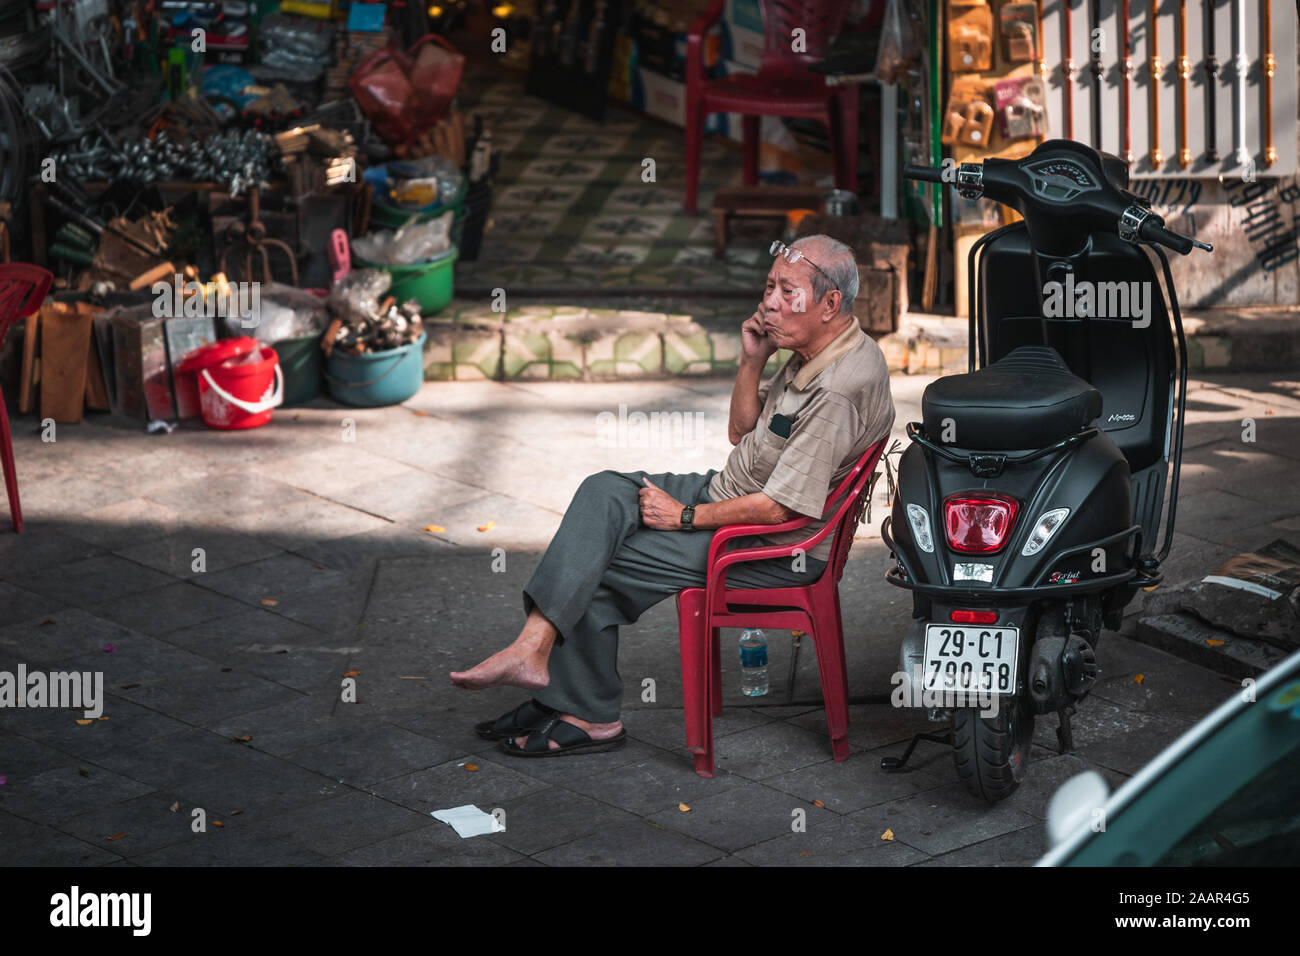 Hanoi, Vietnam - 12th October 2019: An old elderly Asian man sits on a plastic chair next to a moped on the phone Stock Photo